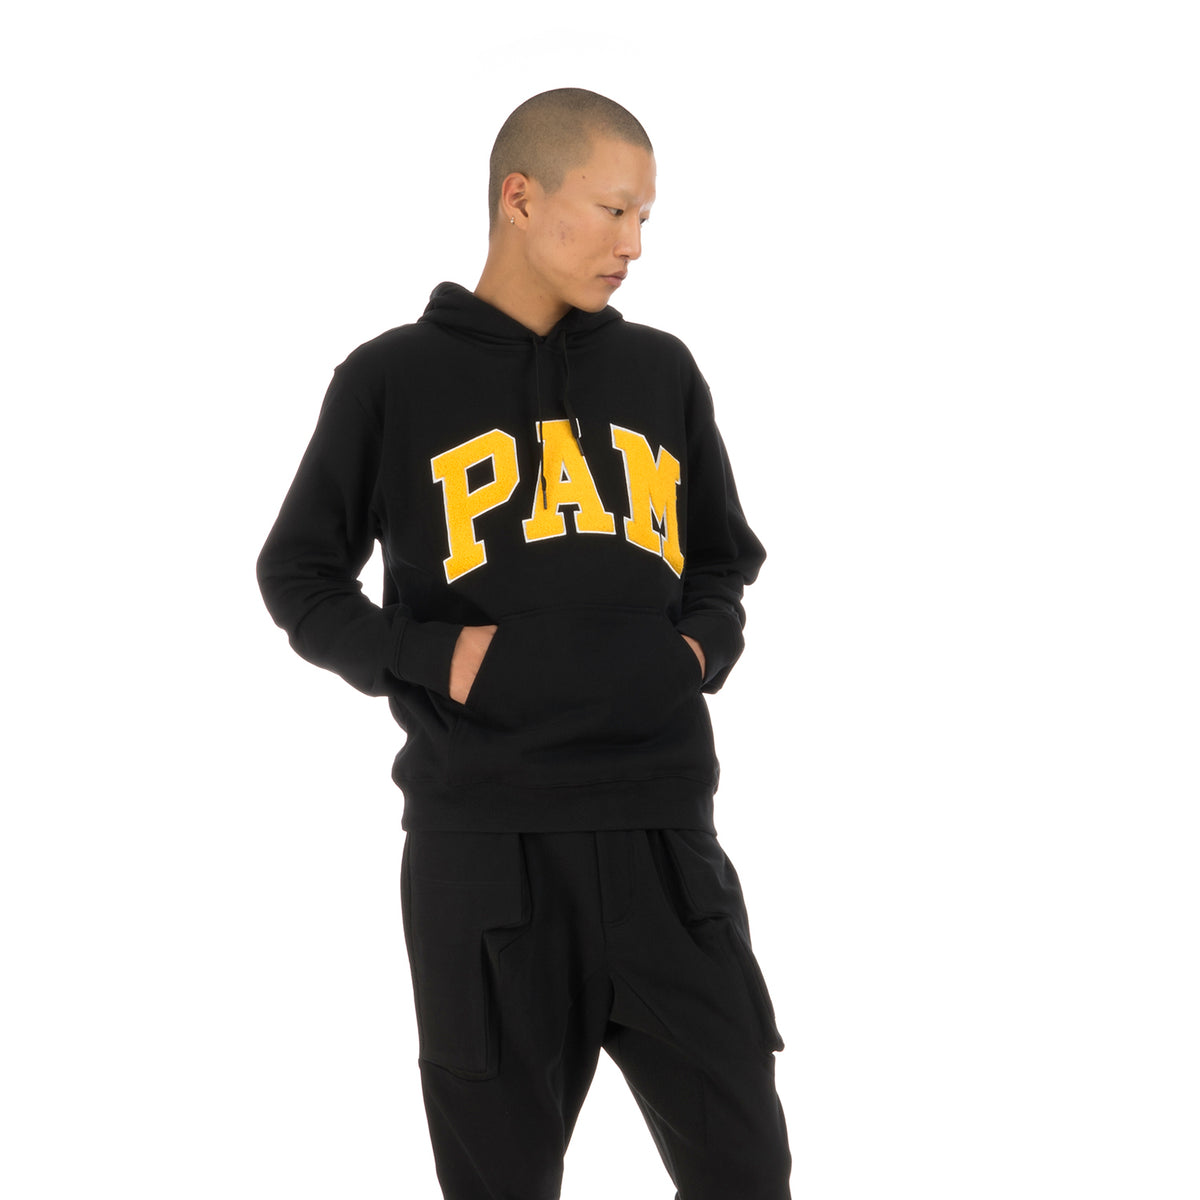 Perks and Mini (P.A.M.) | Mind The P.A.M. Hooded Sweat Black - Concrete